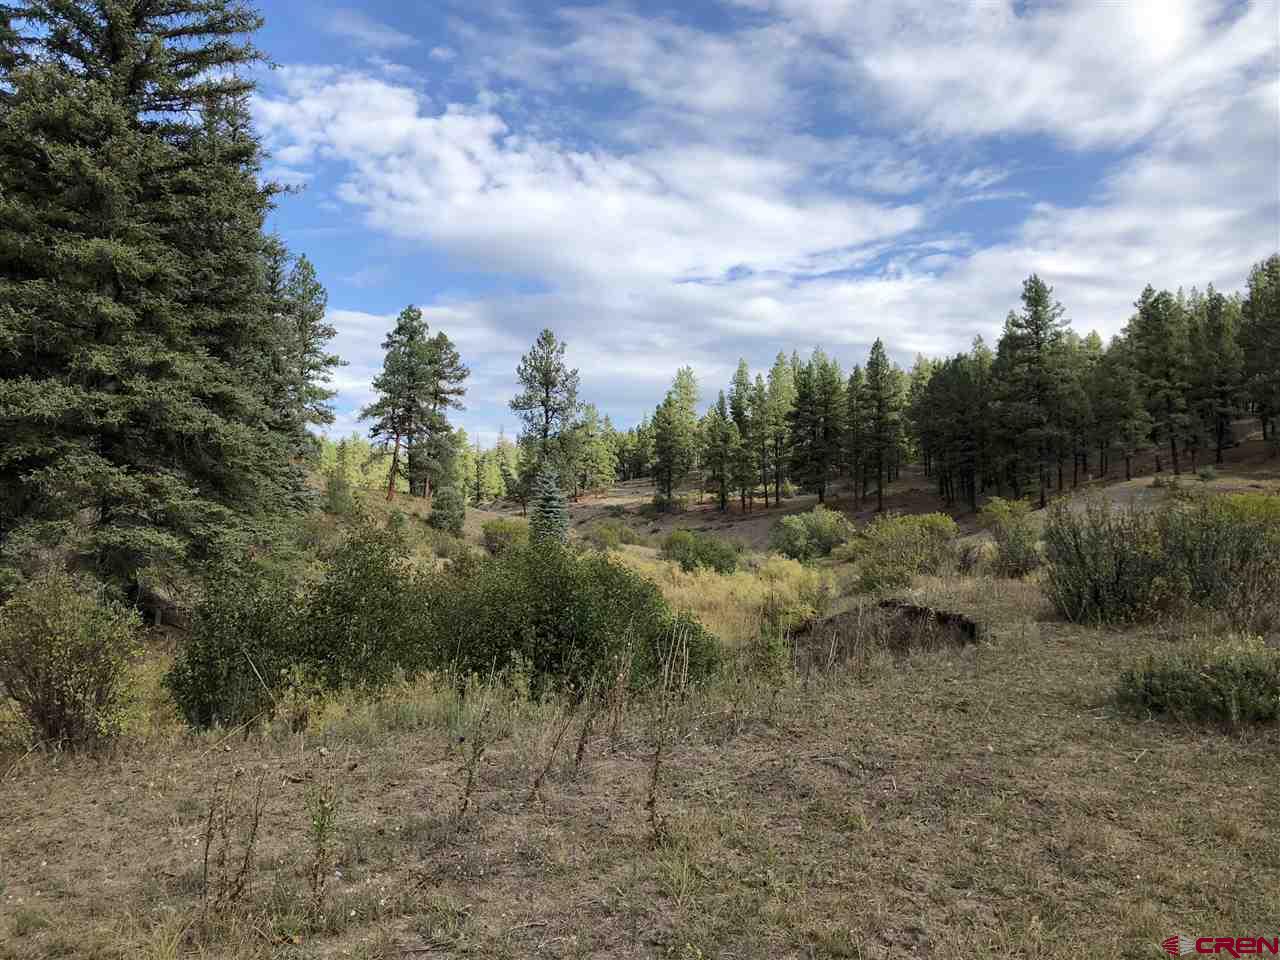 x Hidden Valley Dr. Pagosa Springs CO 81147 For Sale